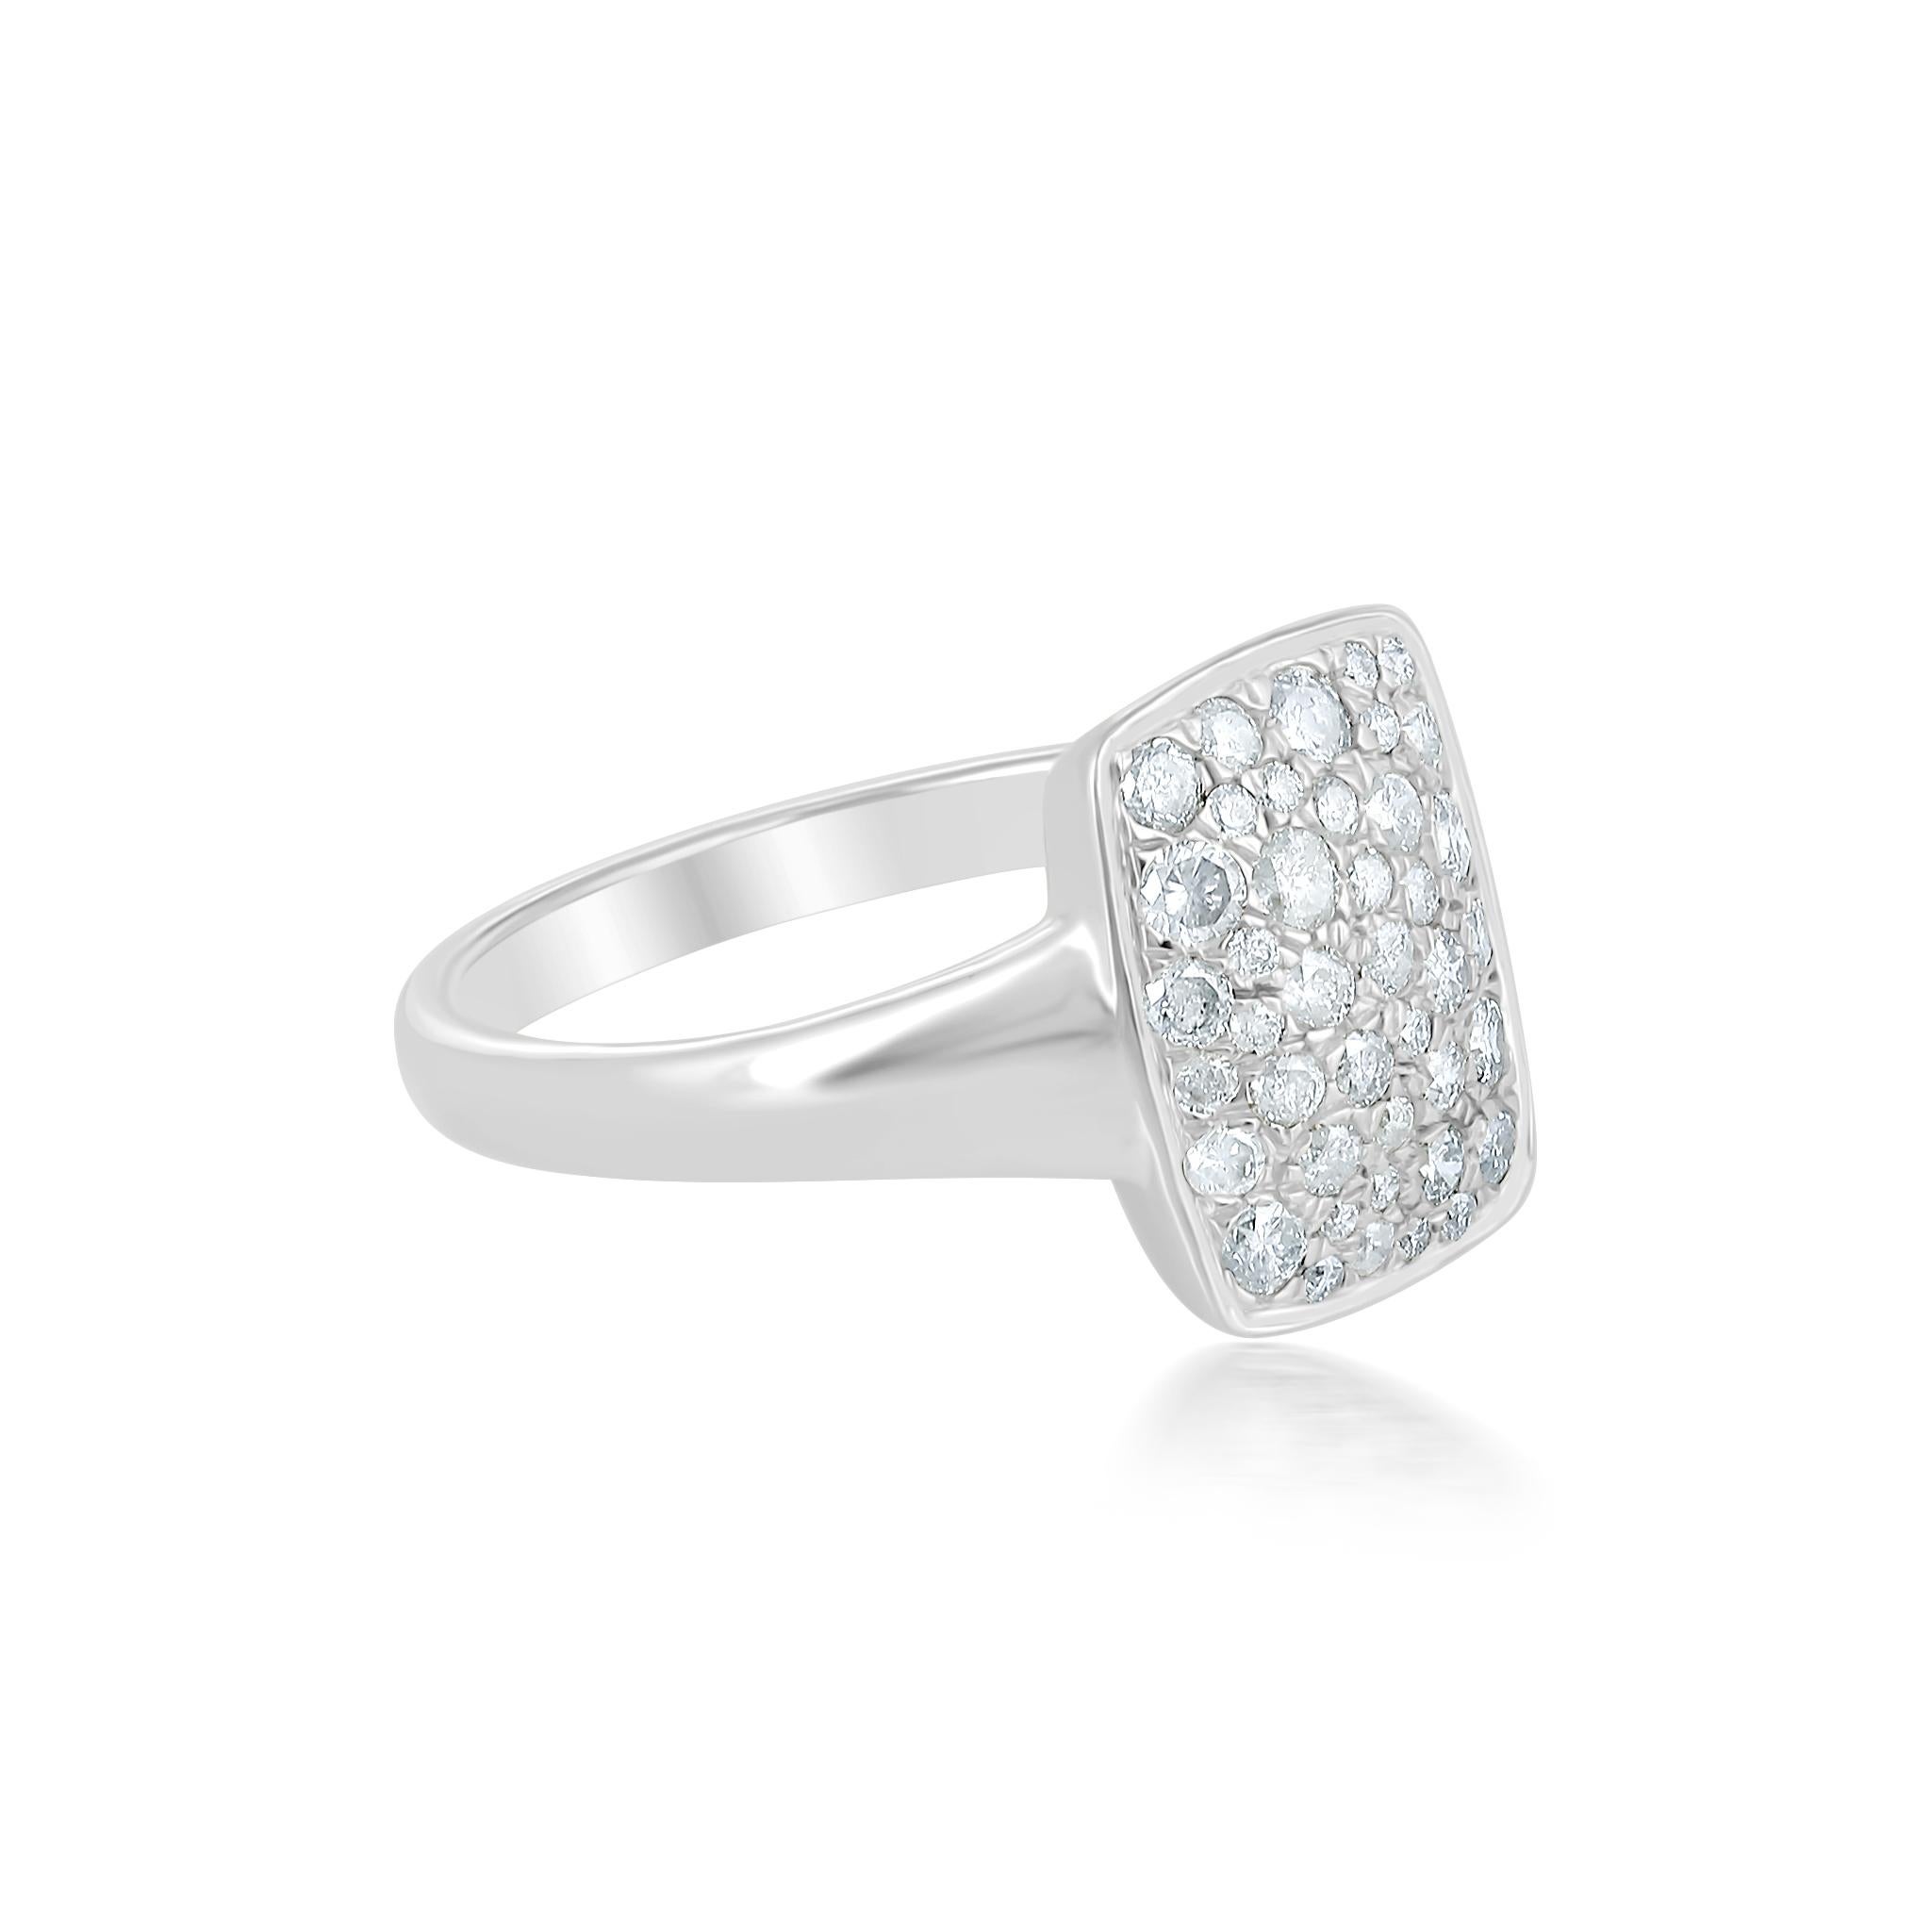 Contemporary Gemistry 0.63cttw Diamond Cluster Ring in 925 Sterling Silver For Sale